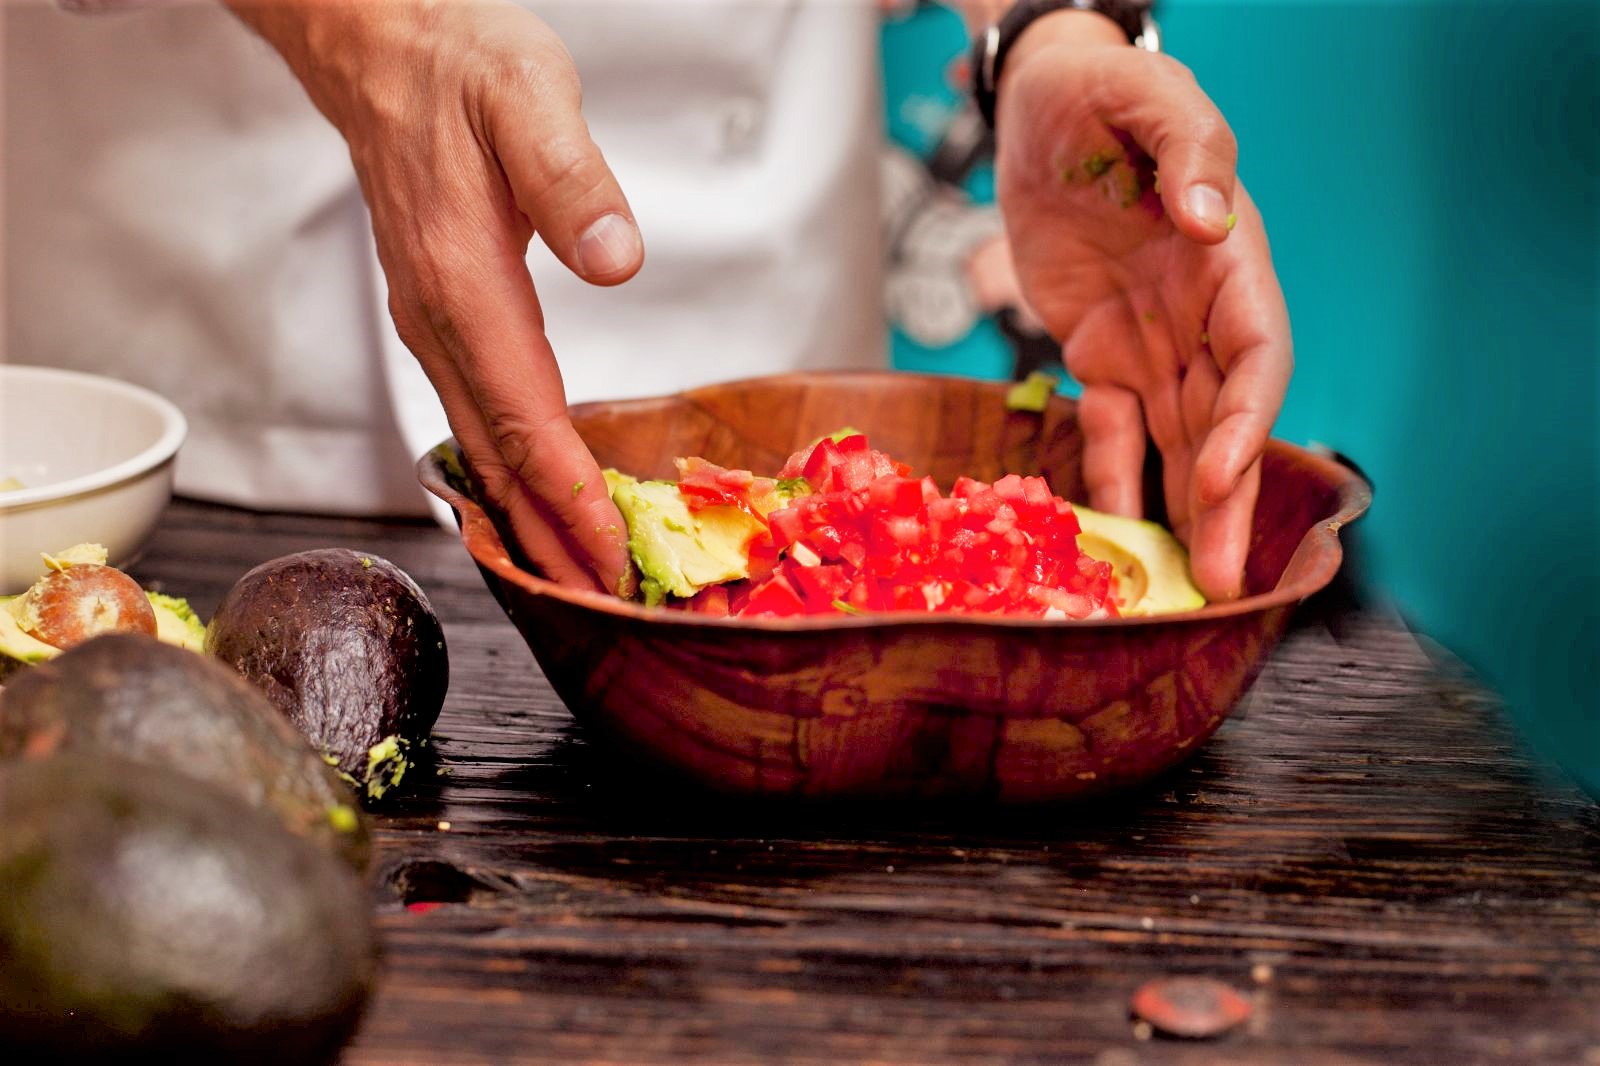 Guacamole cooking class in Mexico